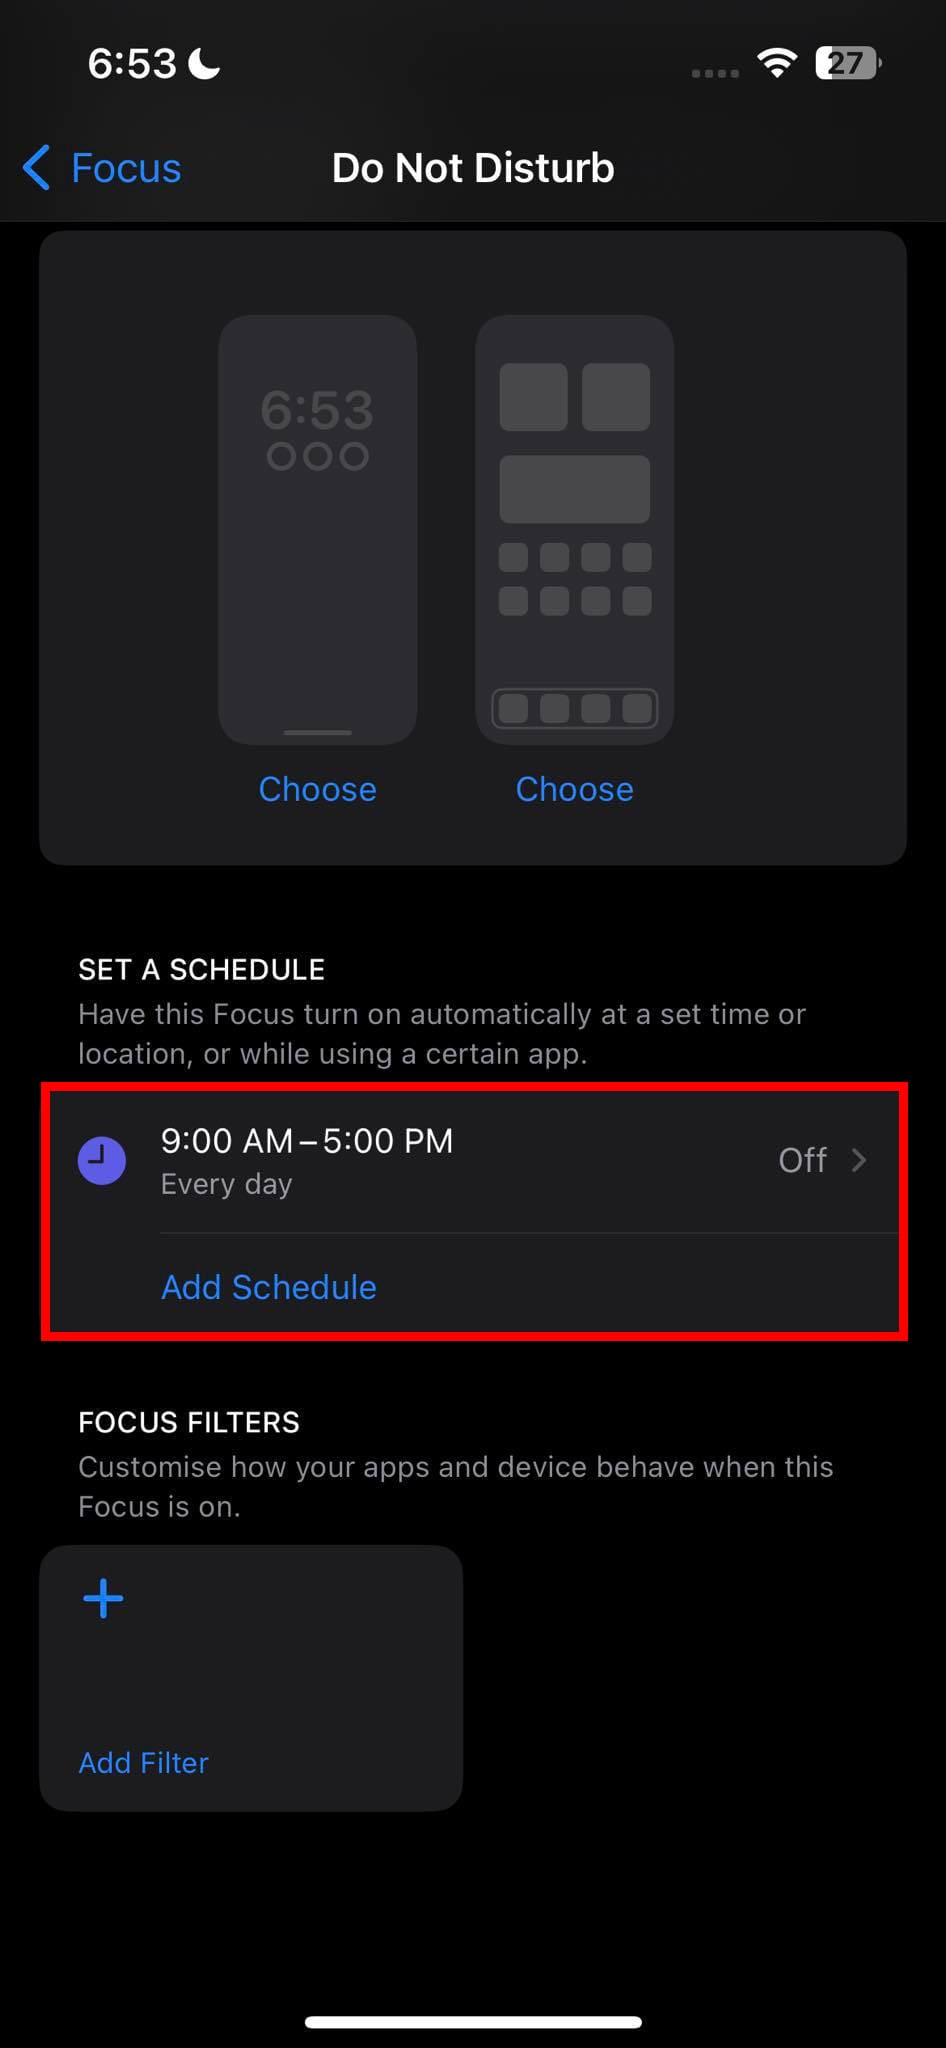 Scheduled DND is Off on iPhone 14